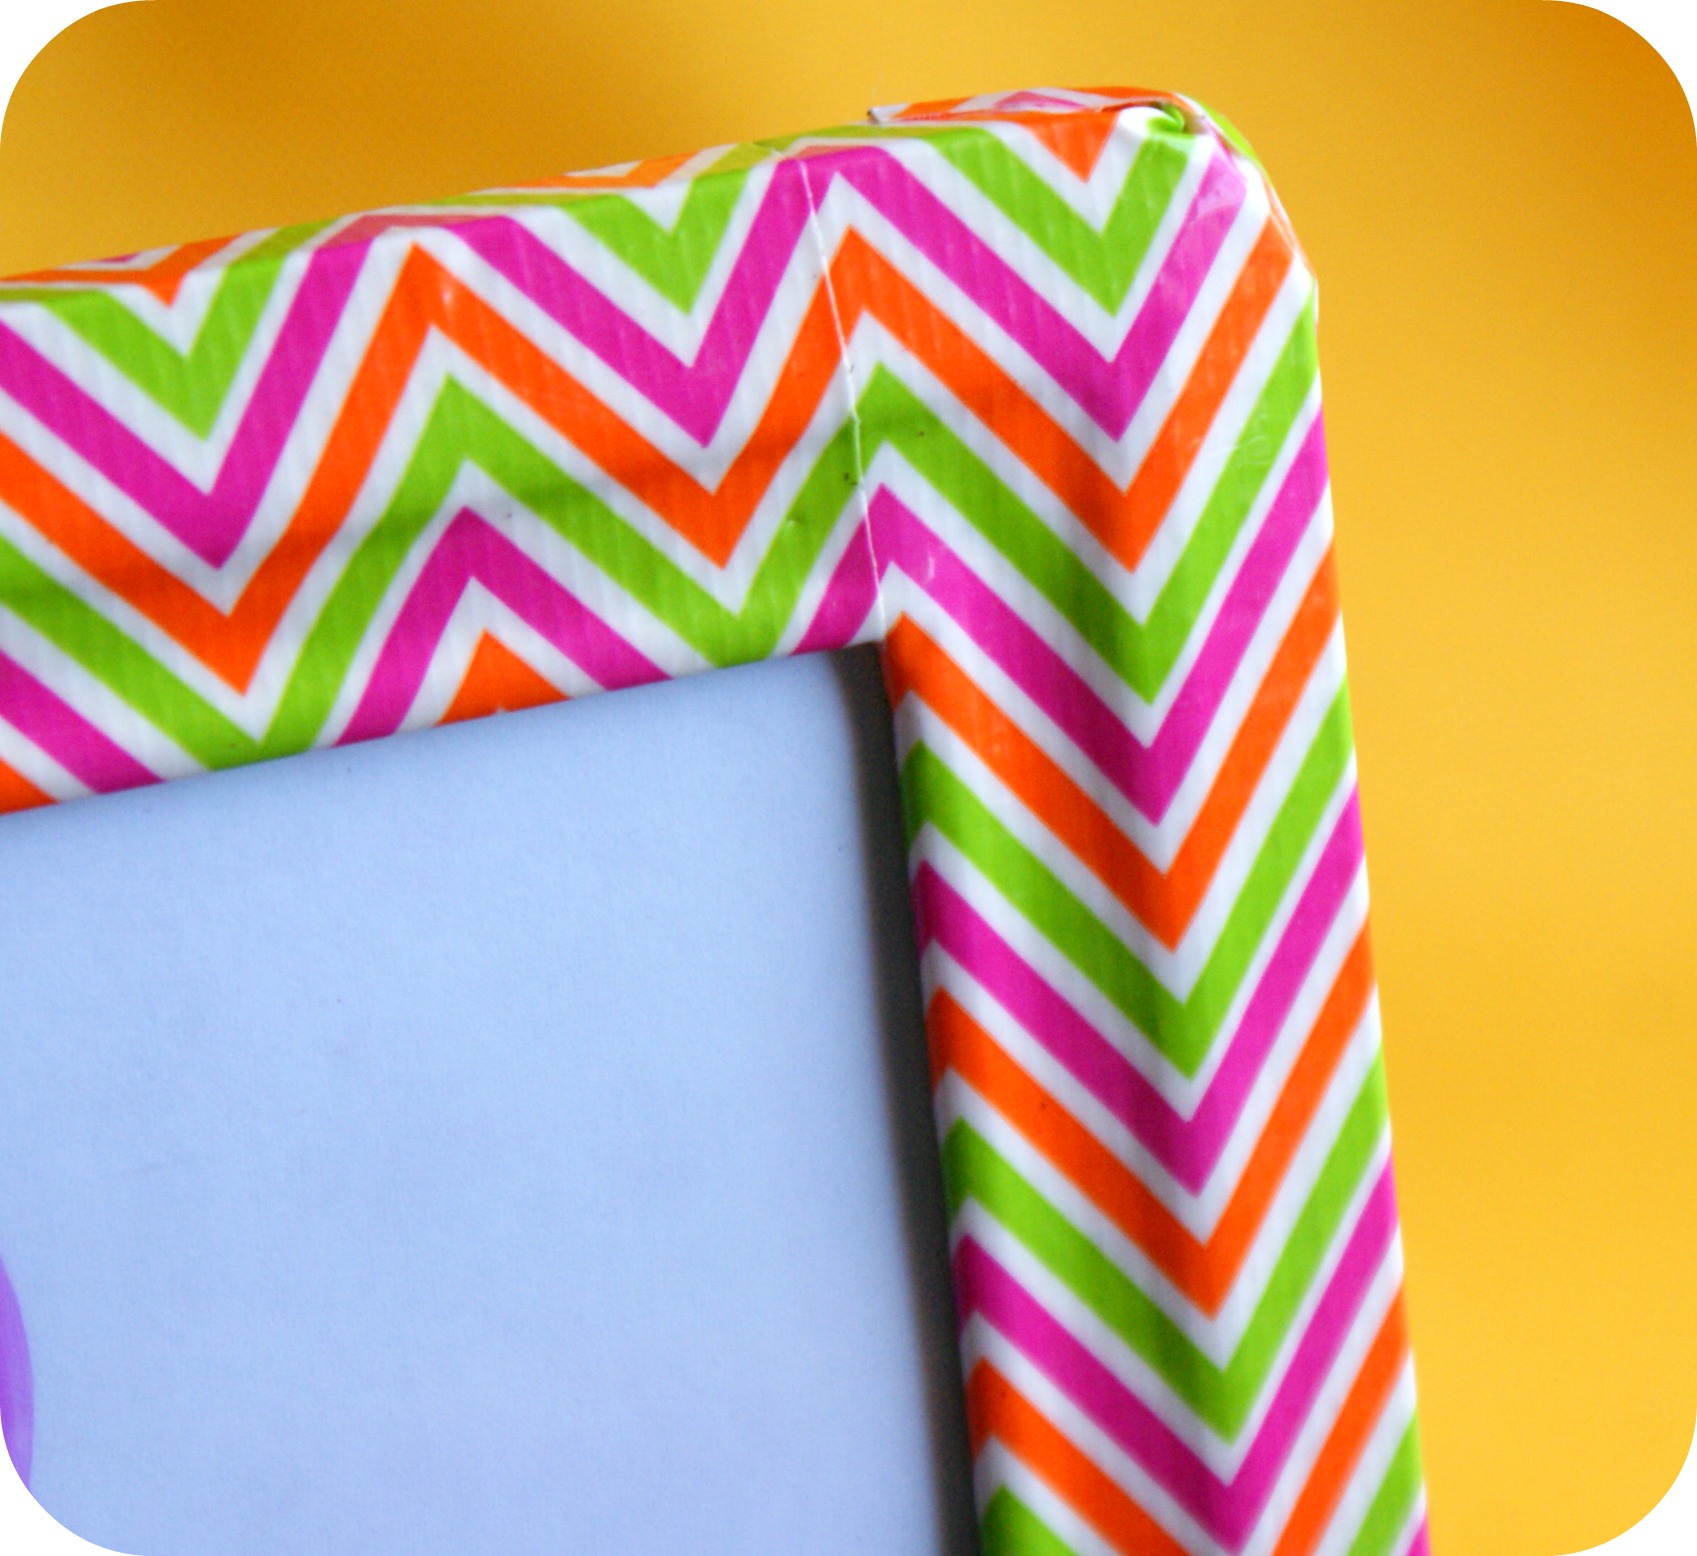 How to Make a Dry Erase Board with Duct Tape